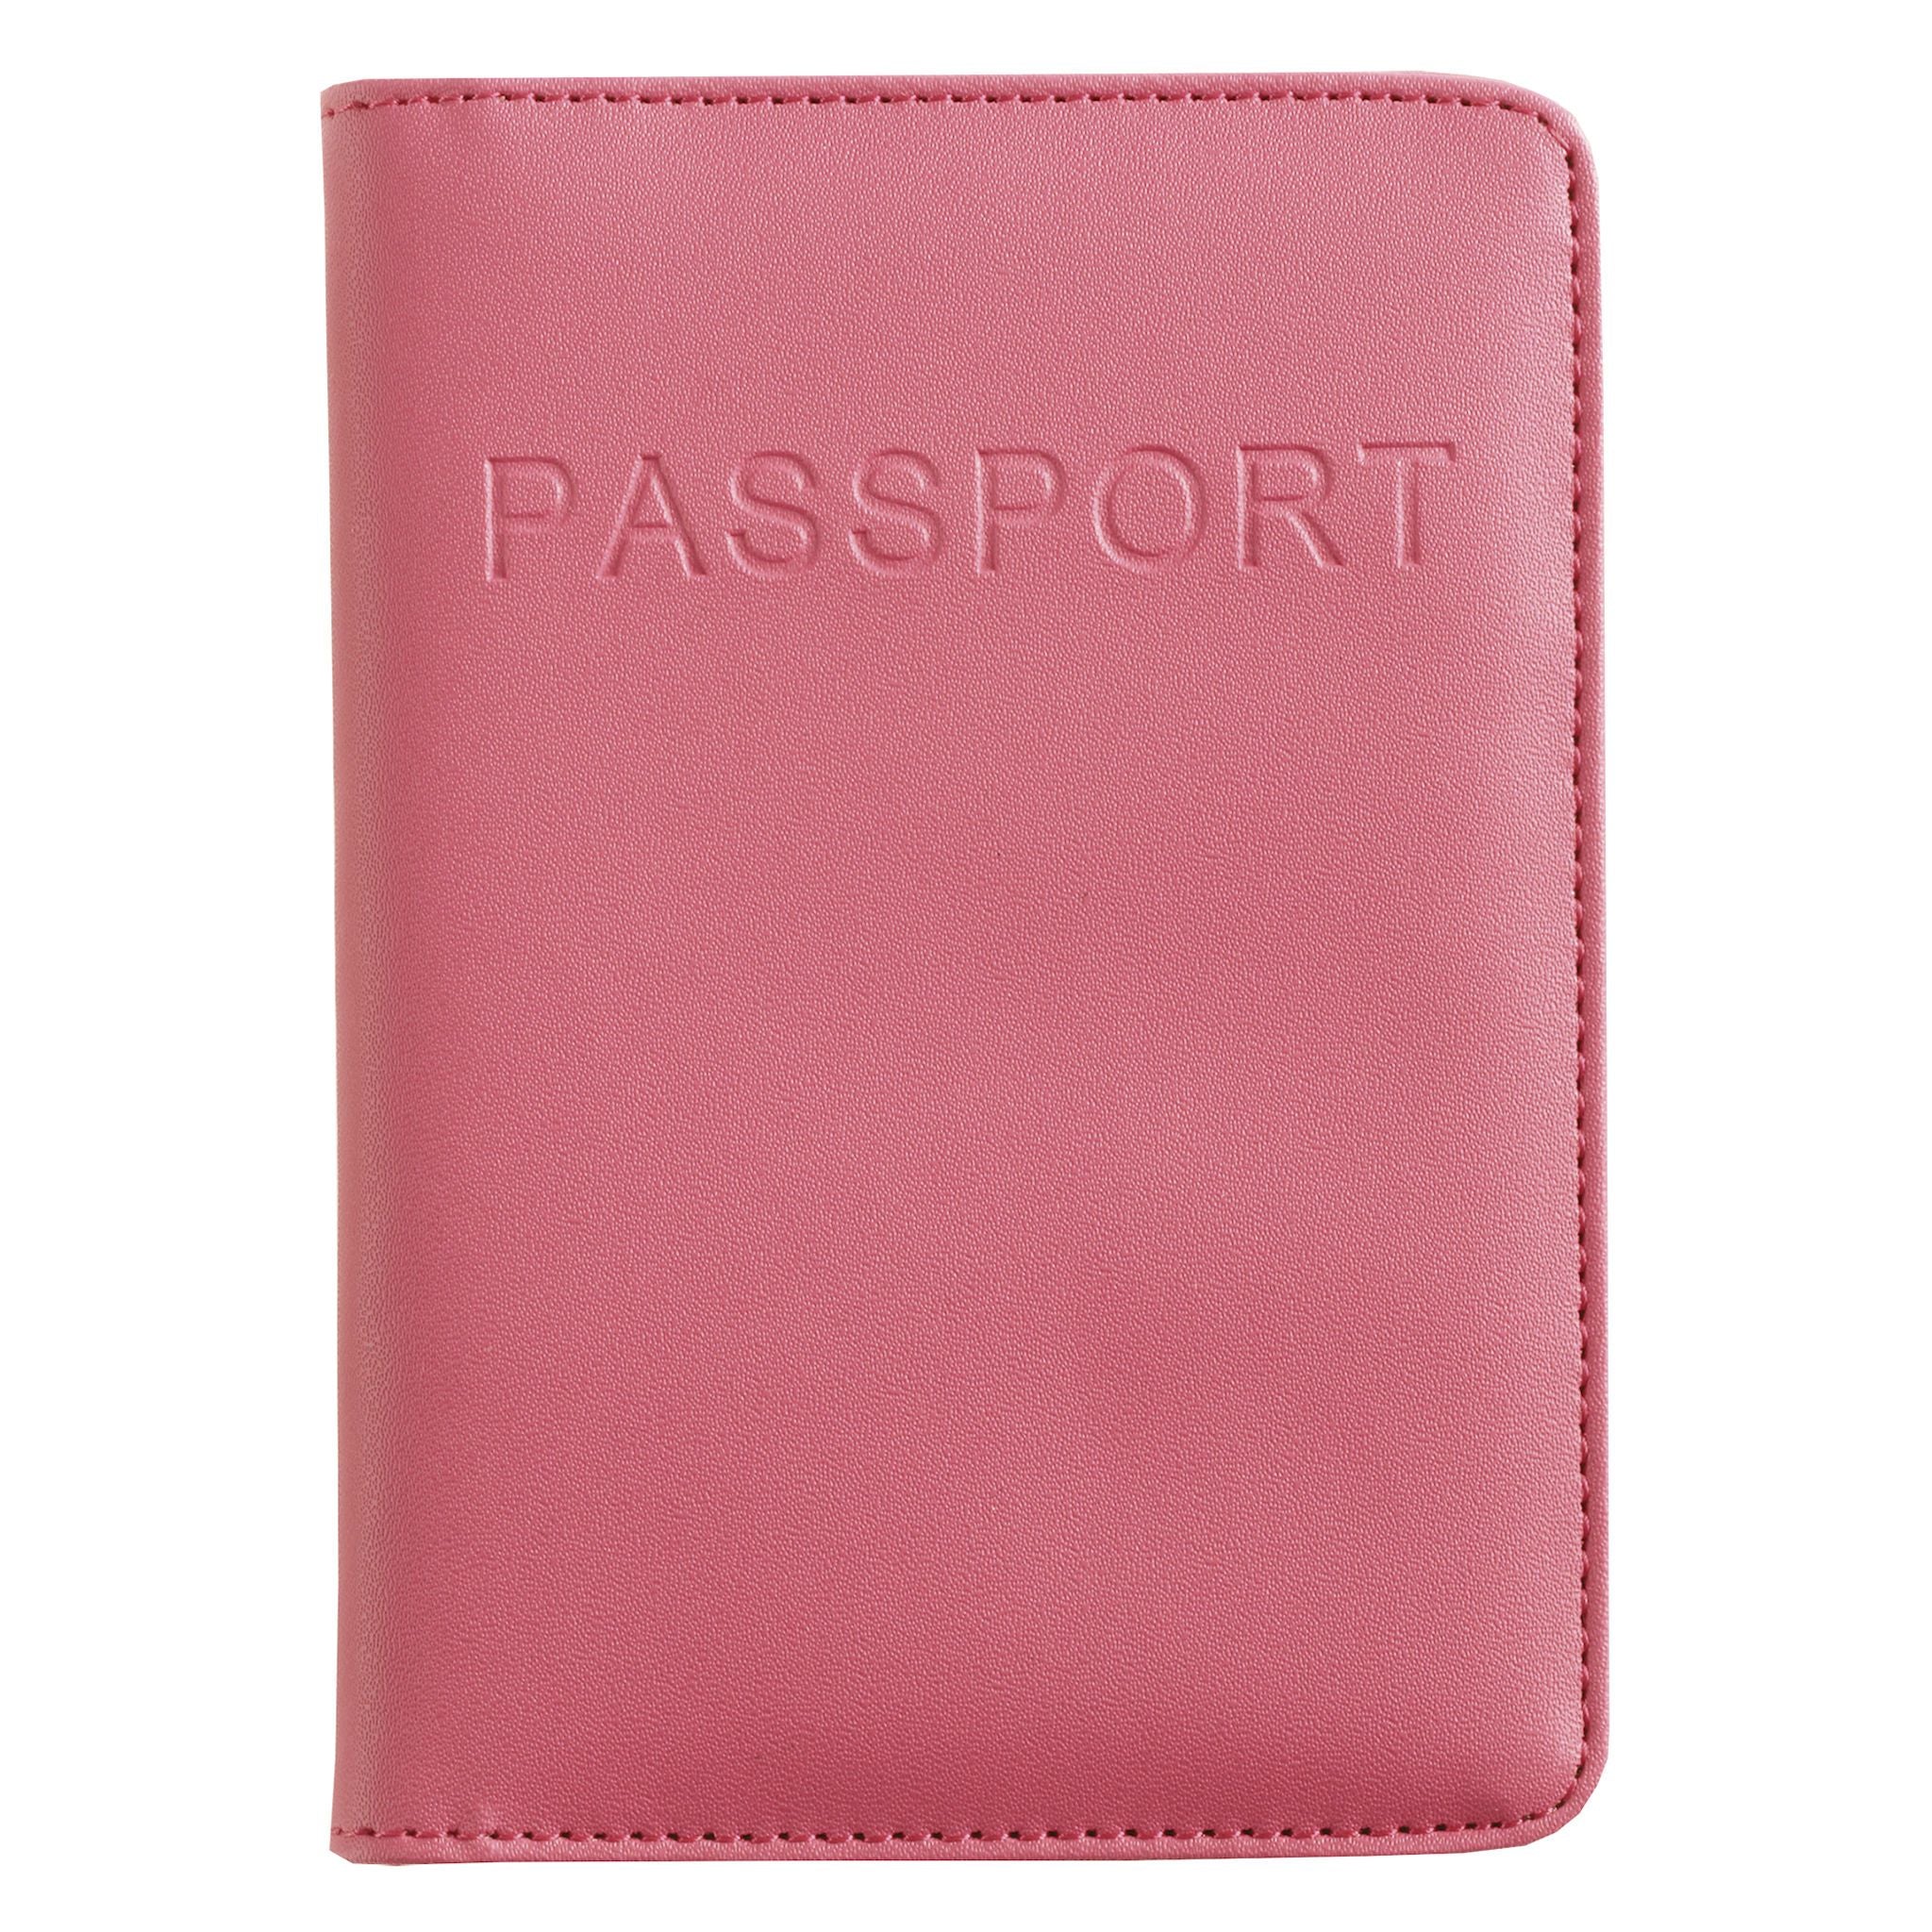 Wallet 2 Pink Real Leather USA Passport Cover Id